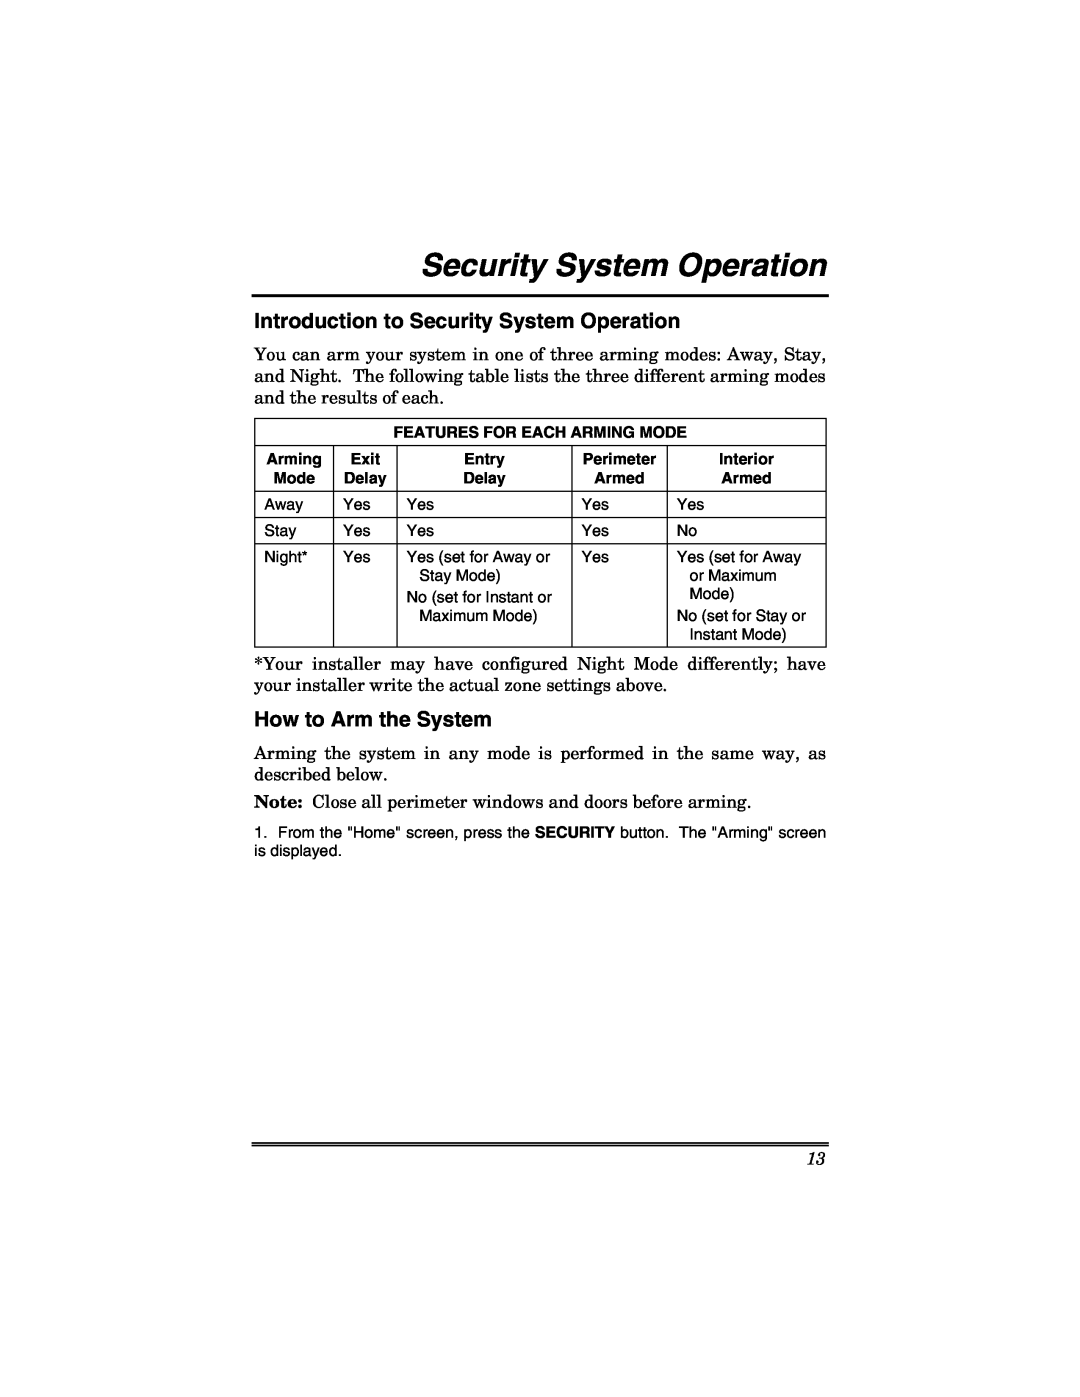 Honeywell 6271V manual Introduction to Security System Operation, How to Arm the System 